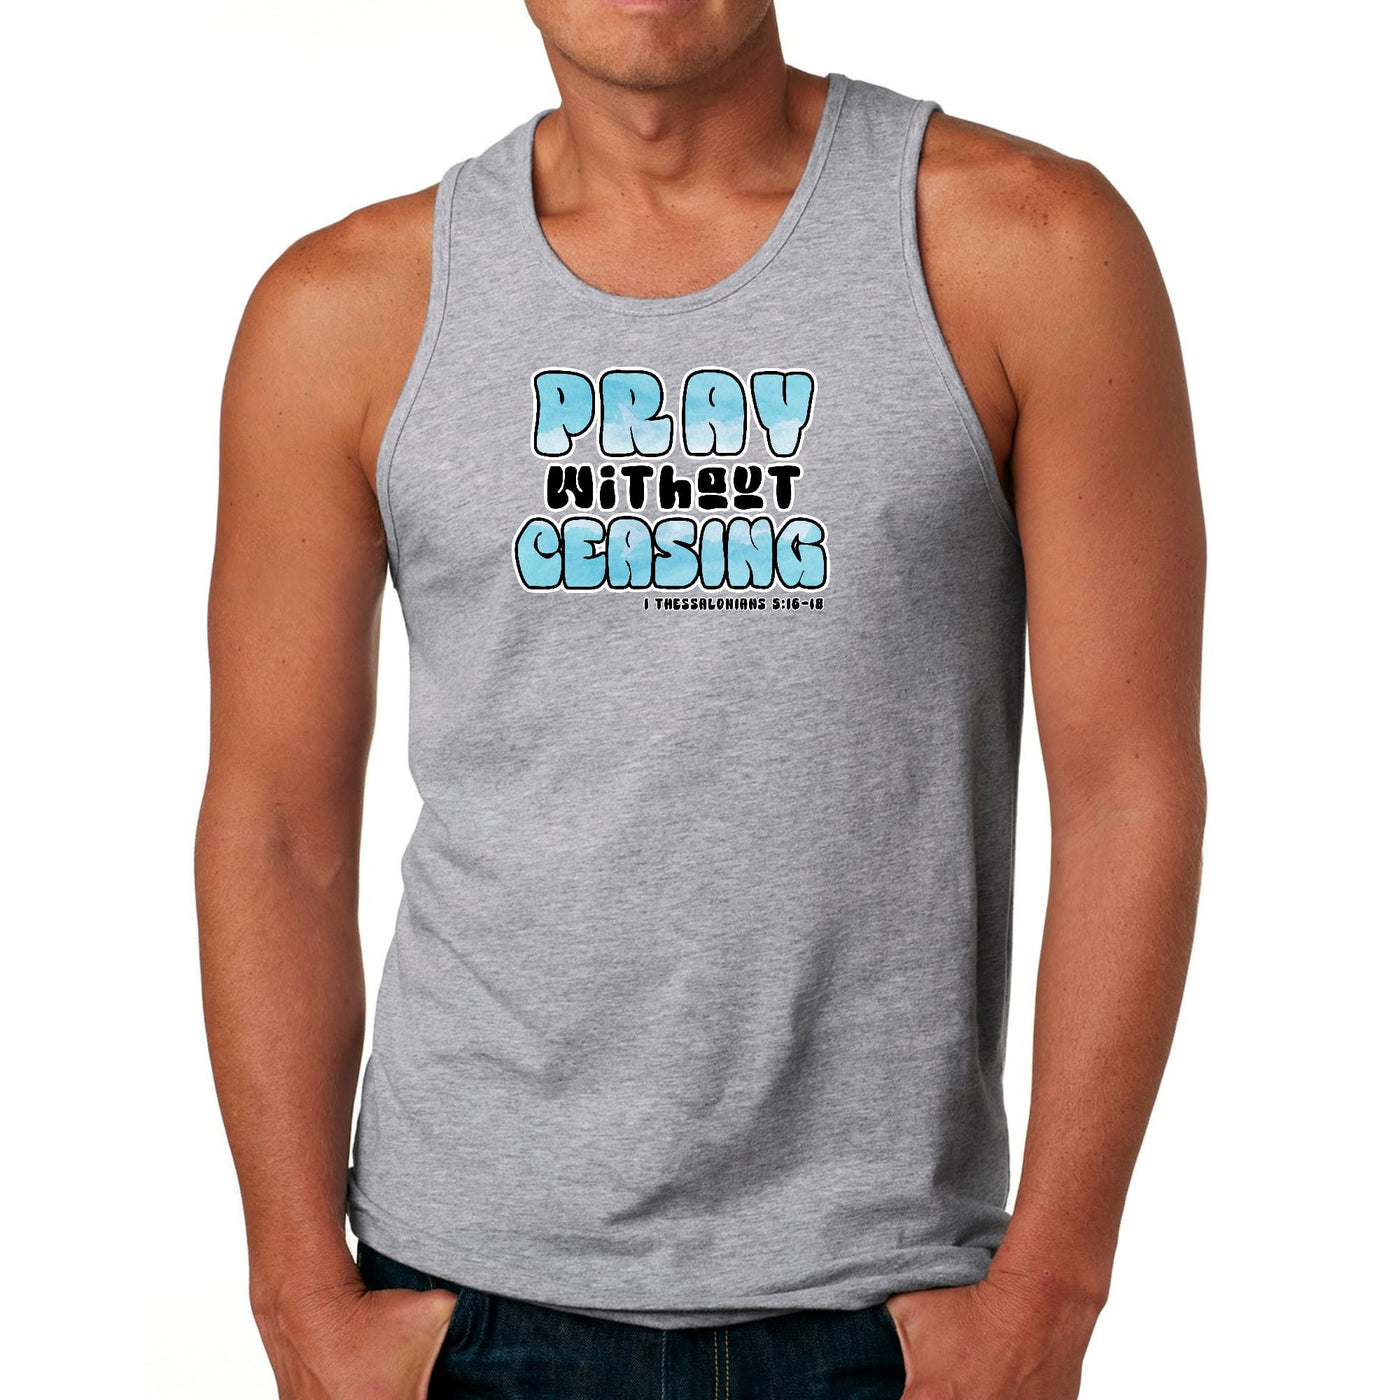 Mens Tank Top Fitness T - shirt Pray Without Ceasing Inspirational - Tops